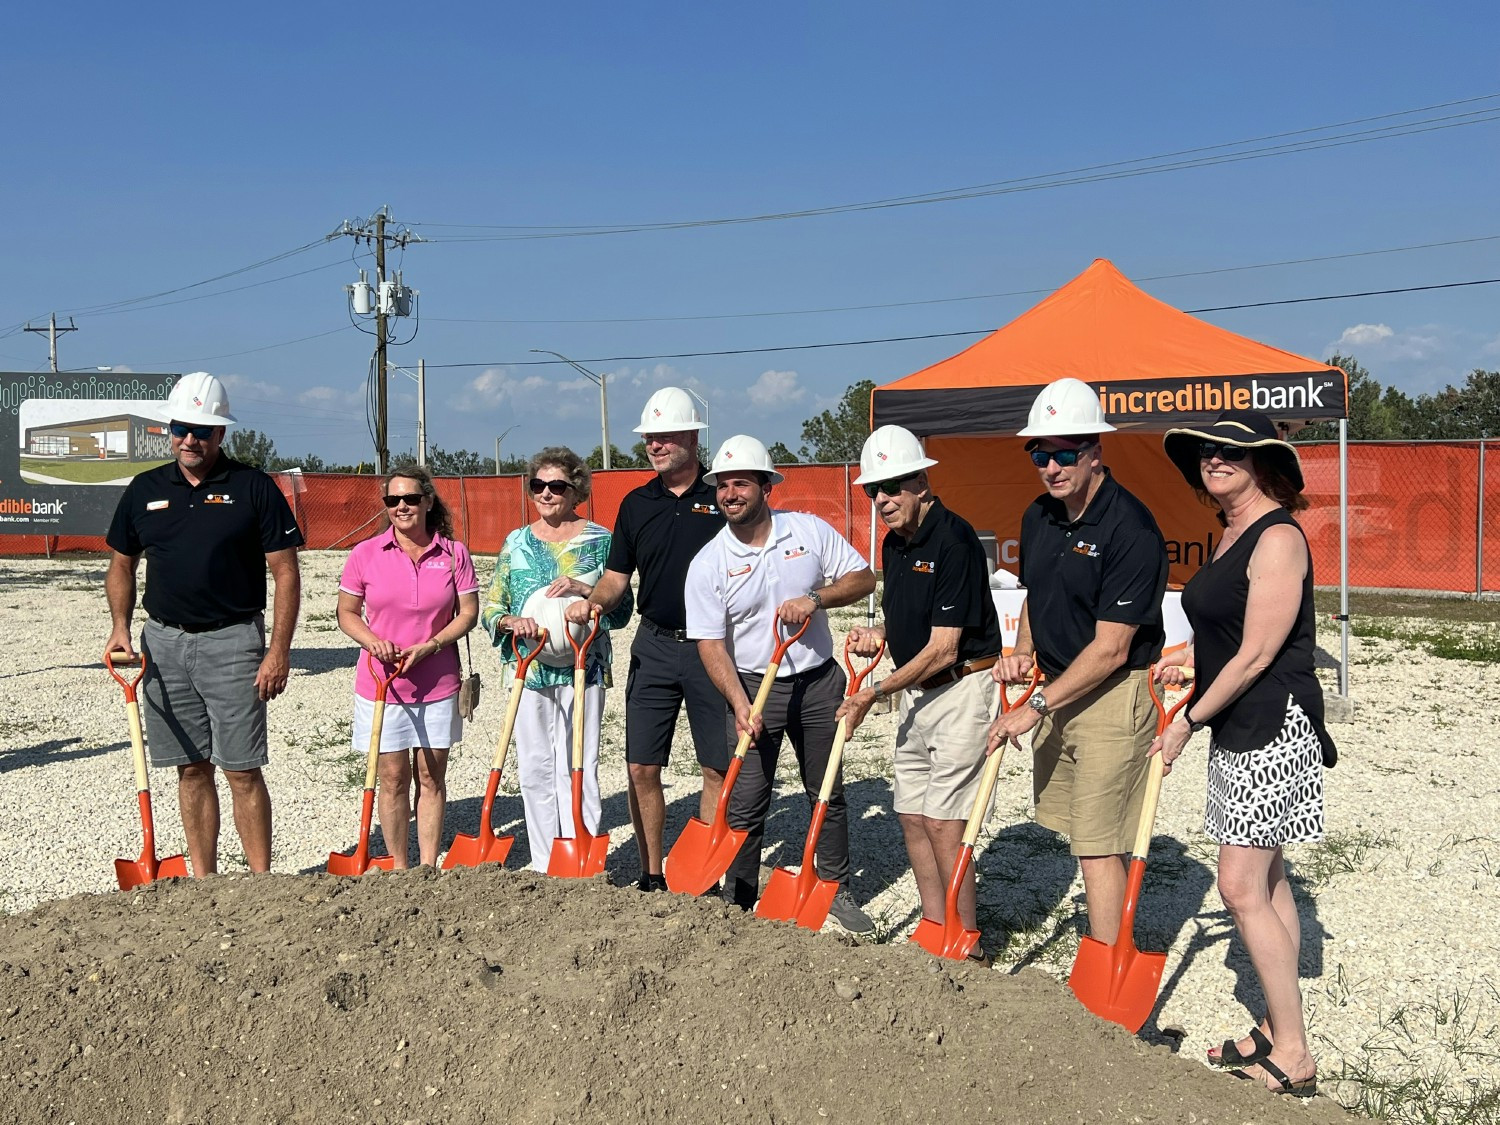 Our brand is all about breaking new ground – literally! We were excited to break ground on our new branch in Florida. 